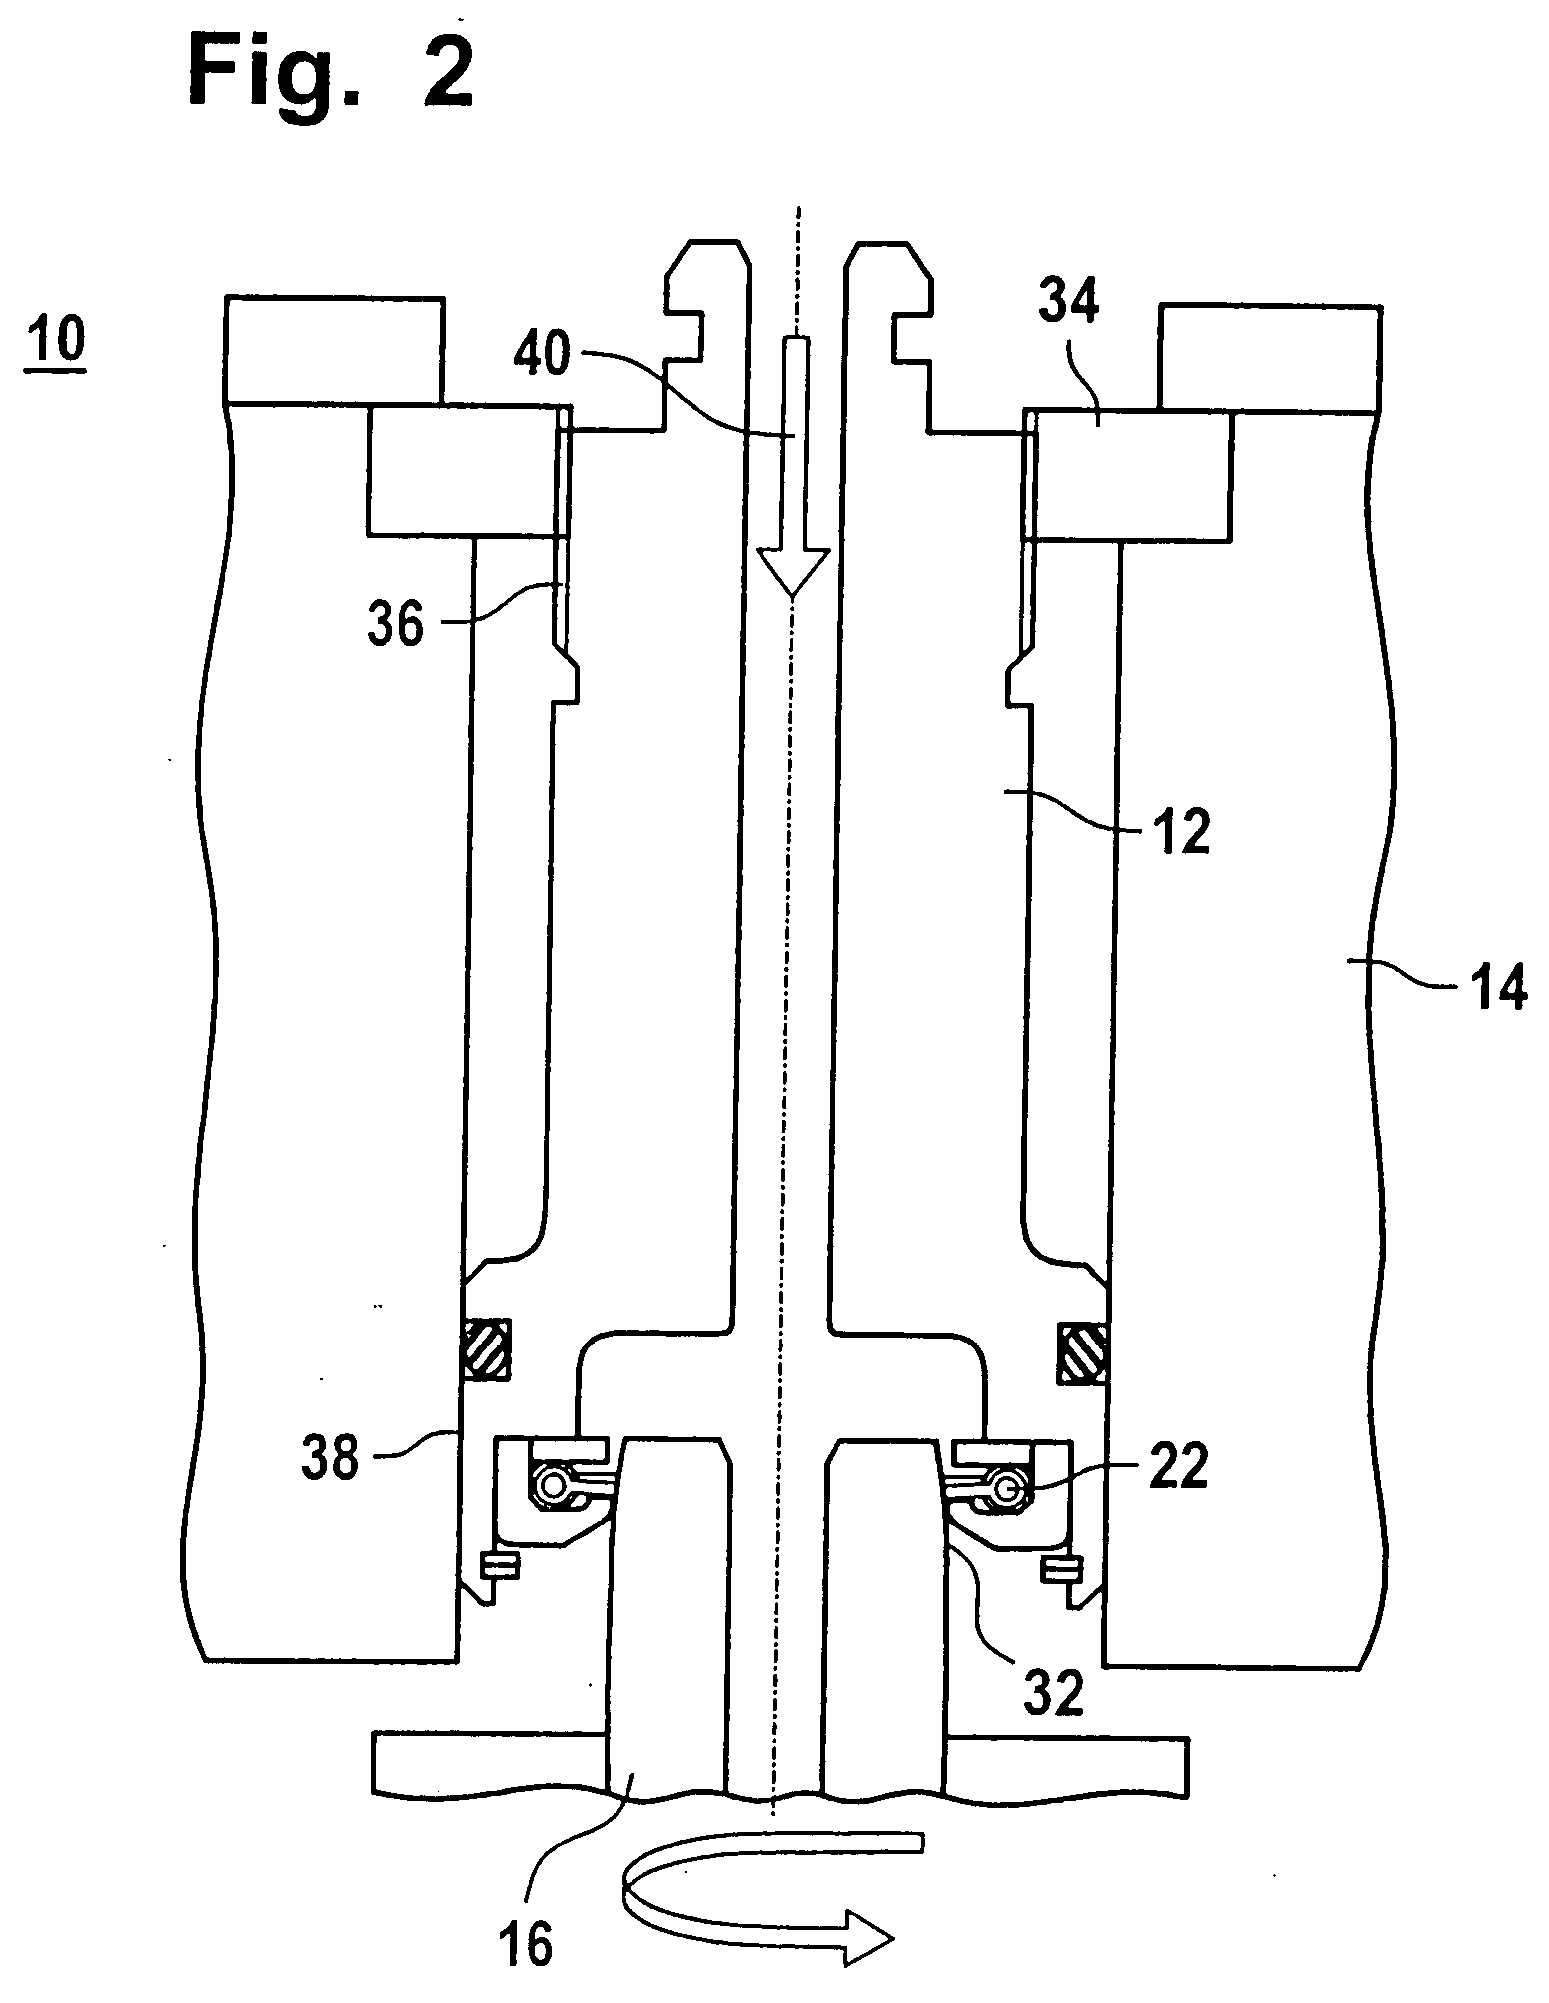 Sealing arrangement for sealing a gap between two components which can rotate in relation to each other about a common rotational axis